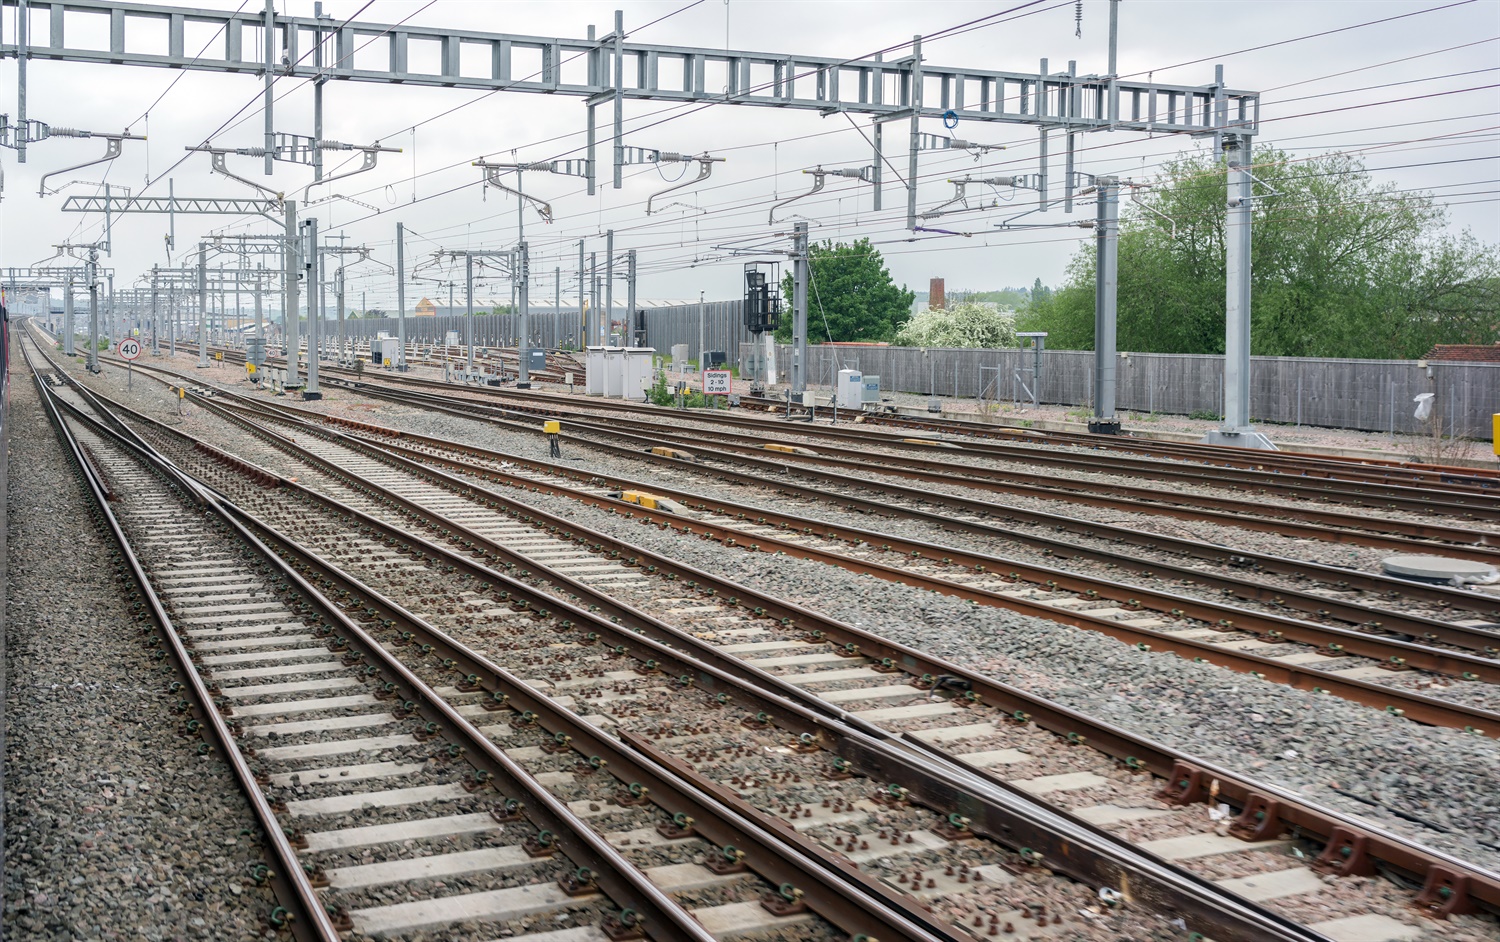 DfT calls for intensified monitoring of Network Rail’s CP6 readiness to avoid repeat of CP5 ‘stasis’